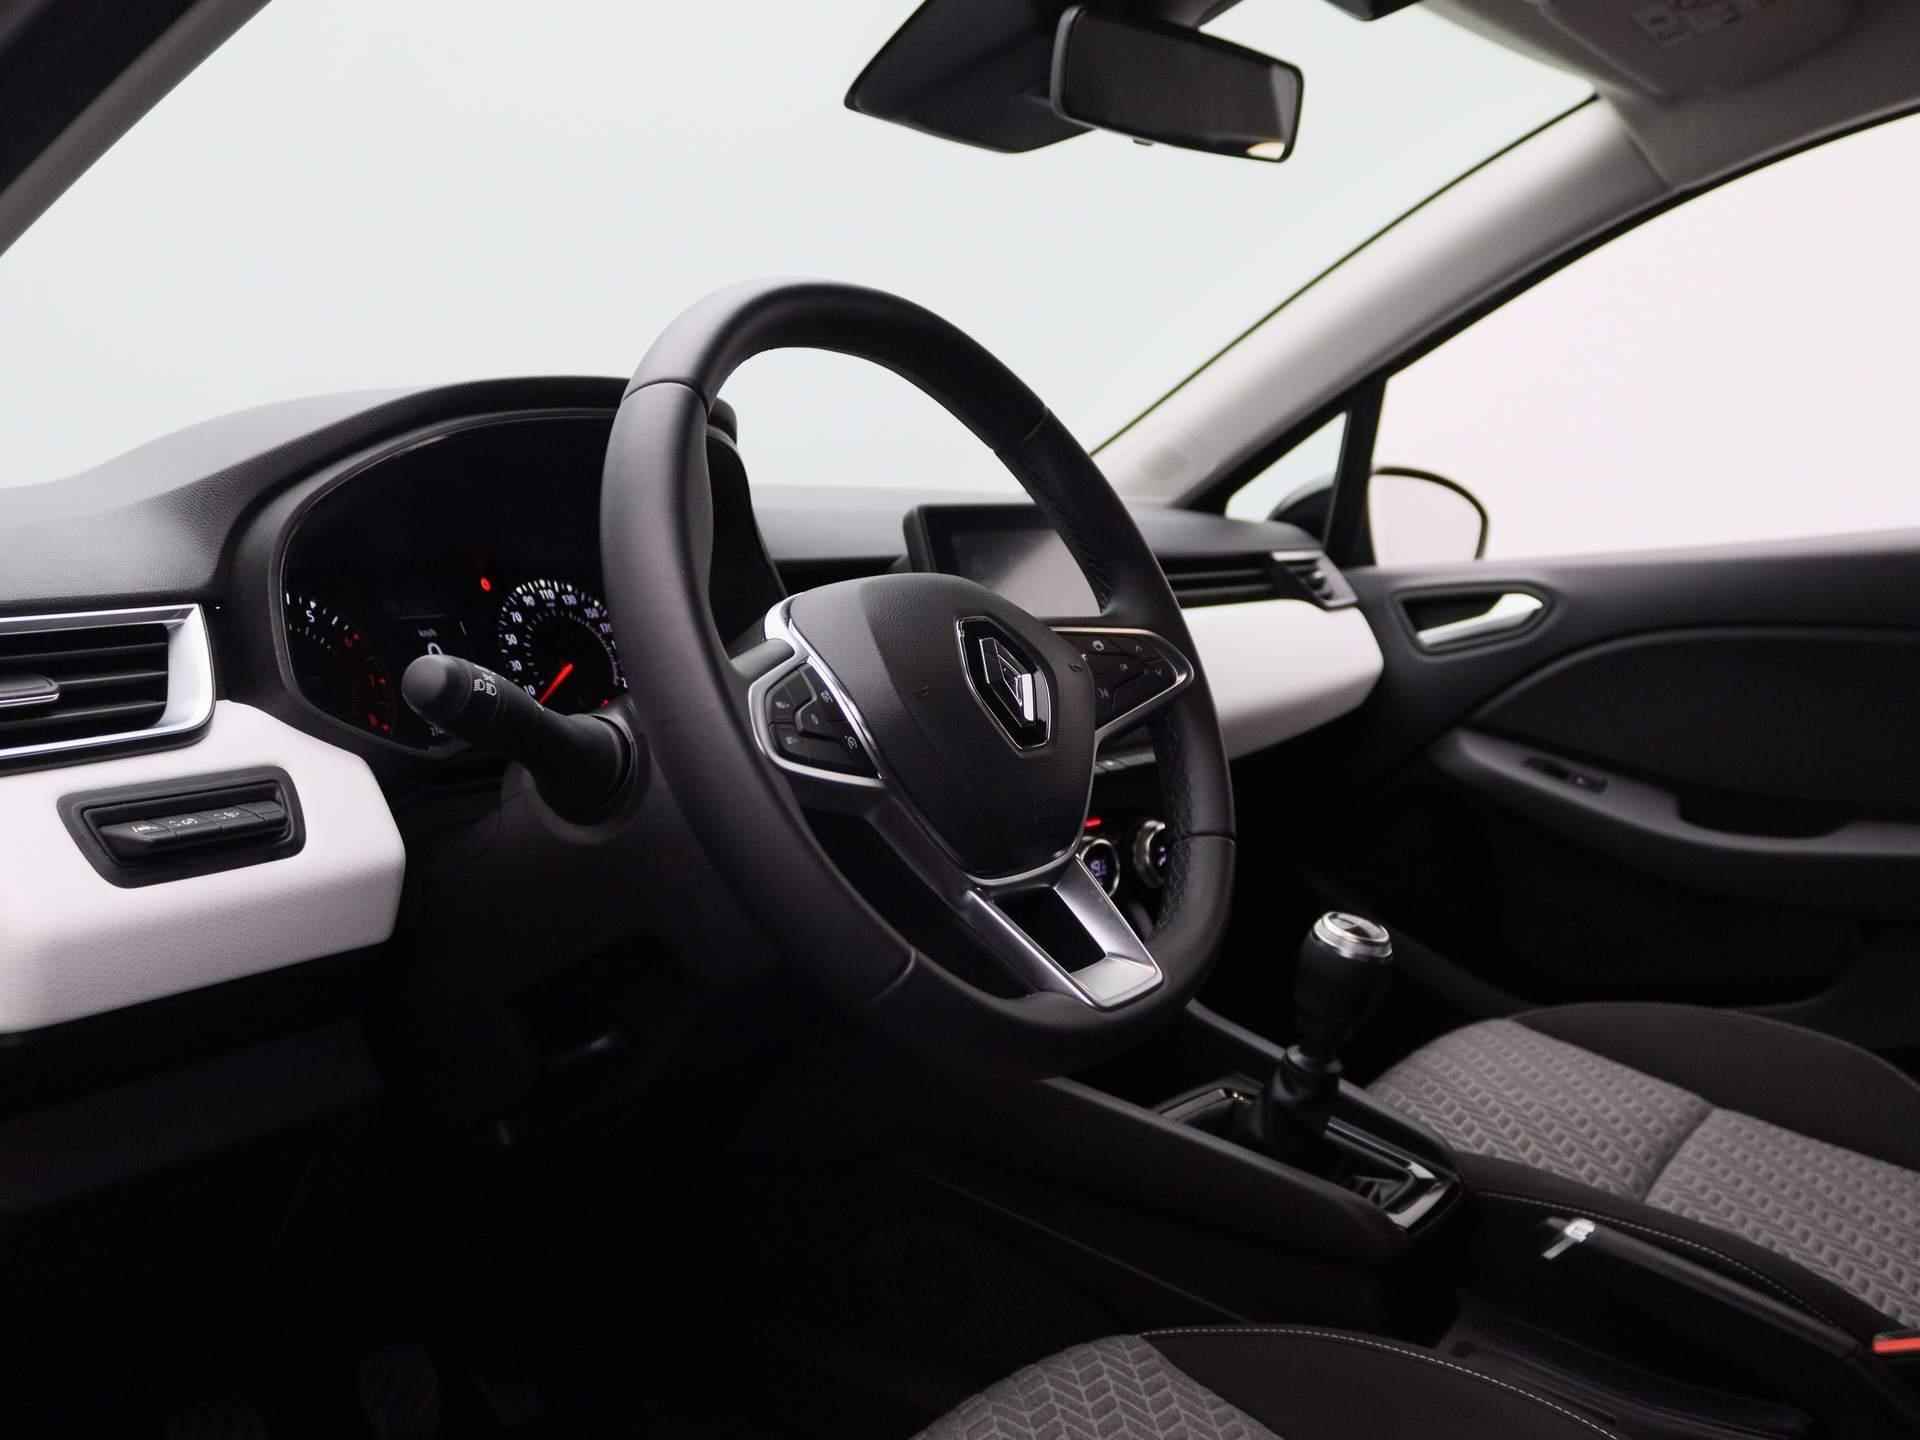 Renault Clio 1.0 TCe 90 Evolution | Climate Control | Full-Map Navigatie | Privacy Glass | PDC Achter | Keyless | 16" LMV | Apple Carplay & Android Auto - 29/35